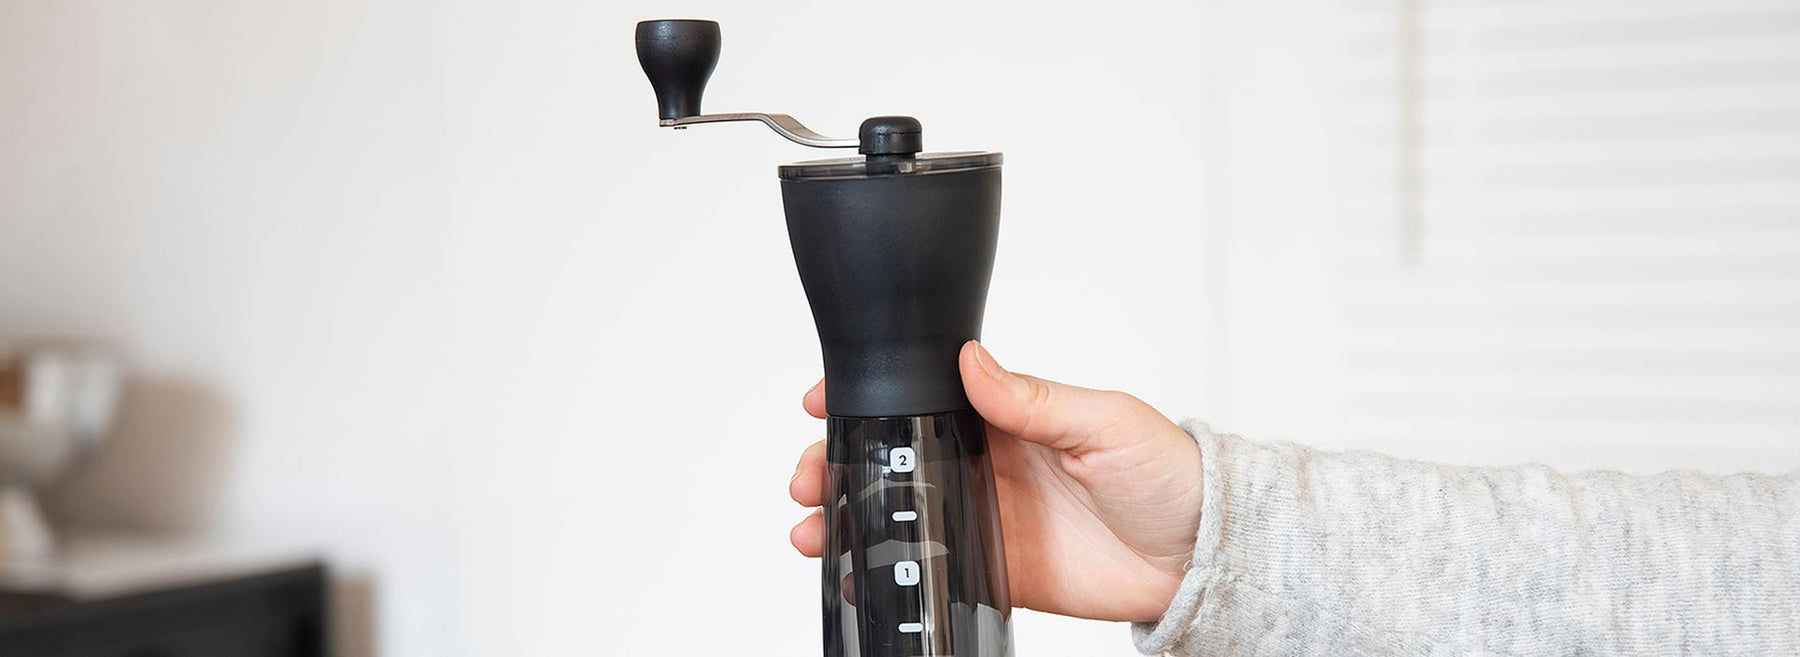 Hario Mini Mill PLUS Coffee Grinder Review